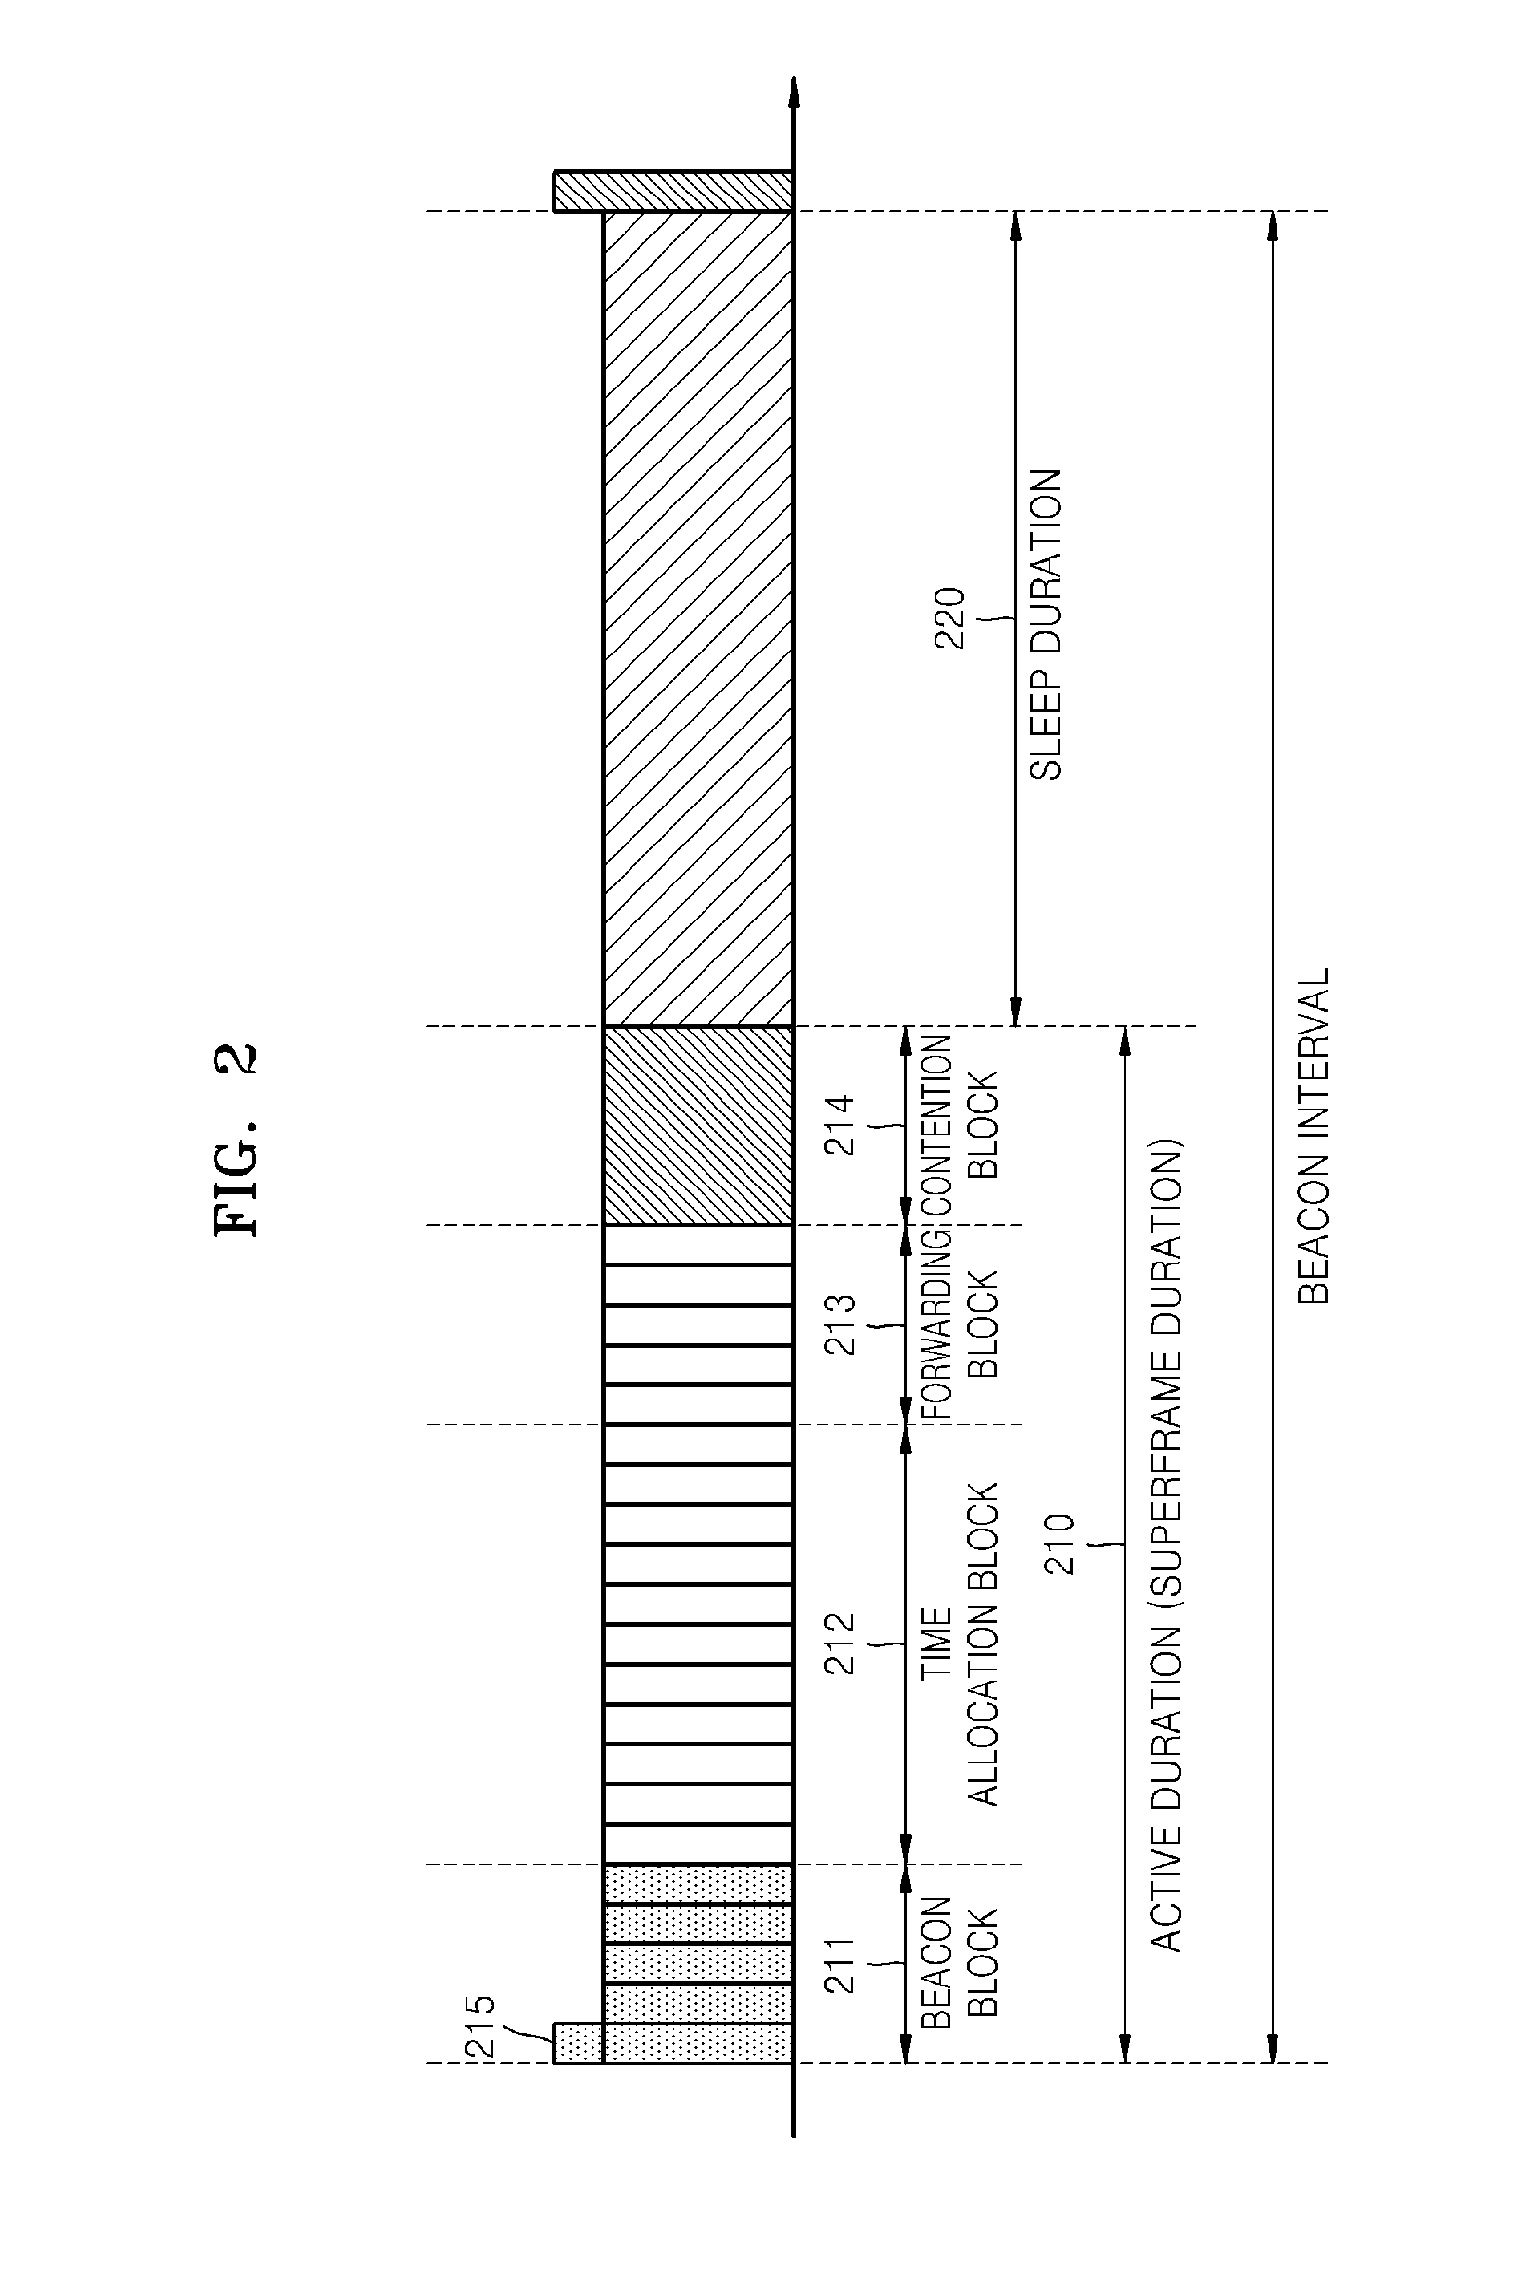 Reliable and low-latency sensor network mac system and method using superframe